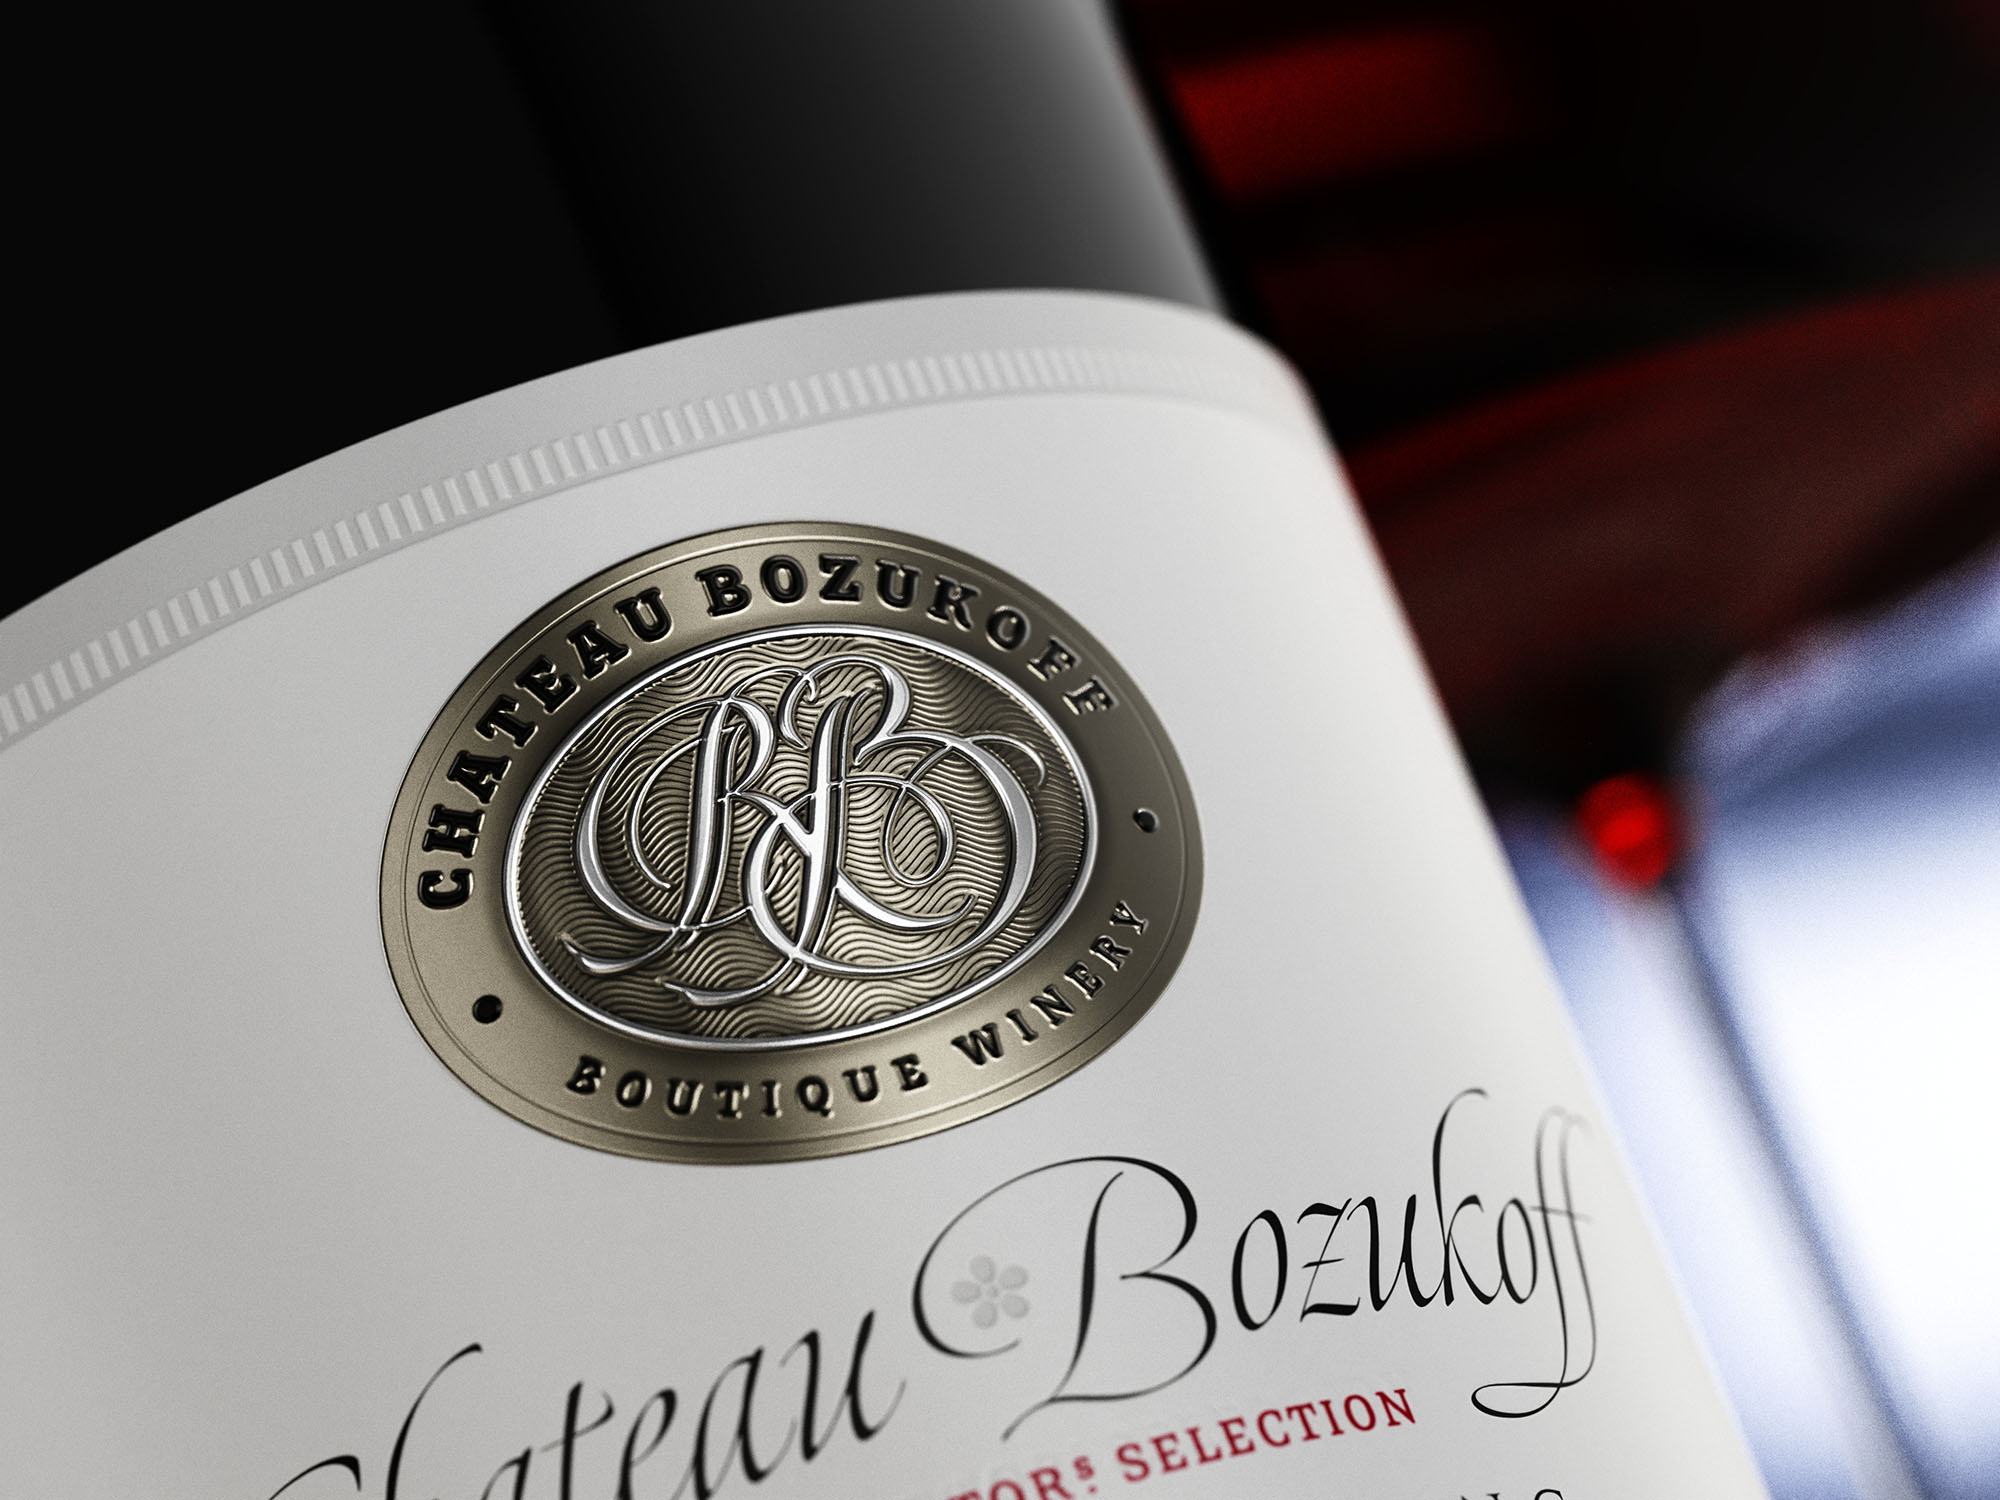 The Labelmaker Transformed Chateau Bozukoff’s Wine Labels with Subtle Sophistication